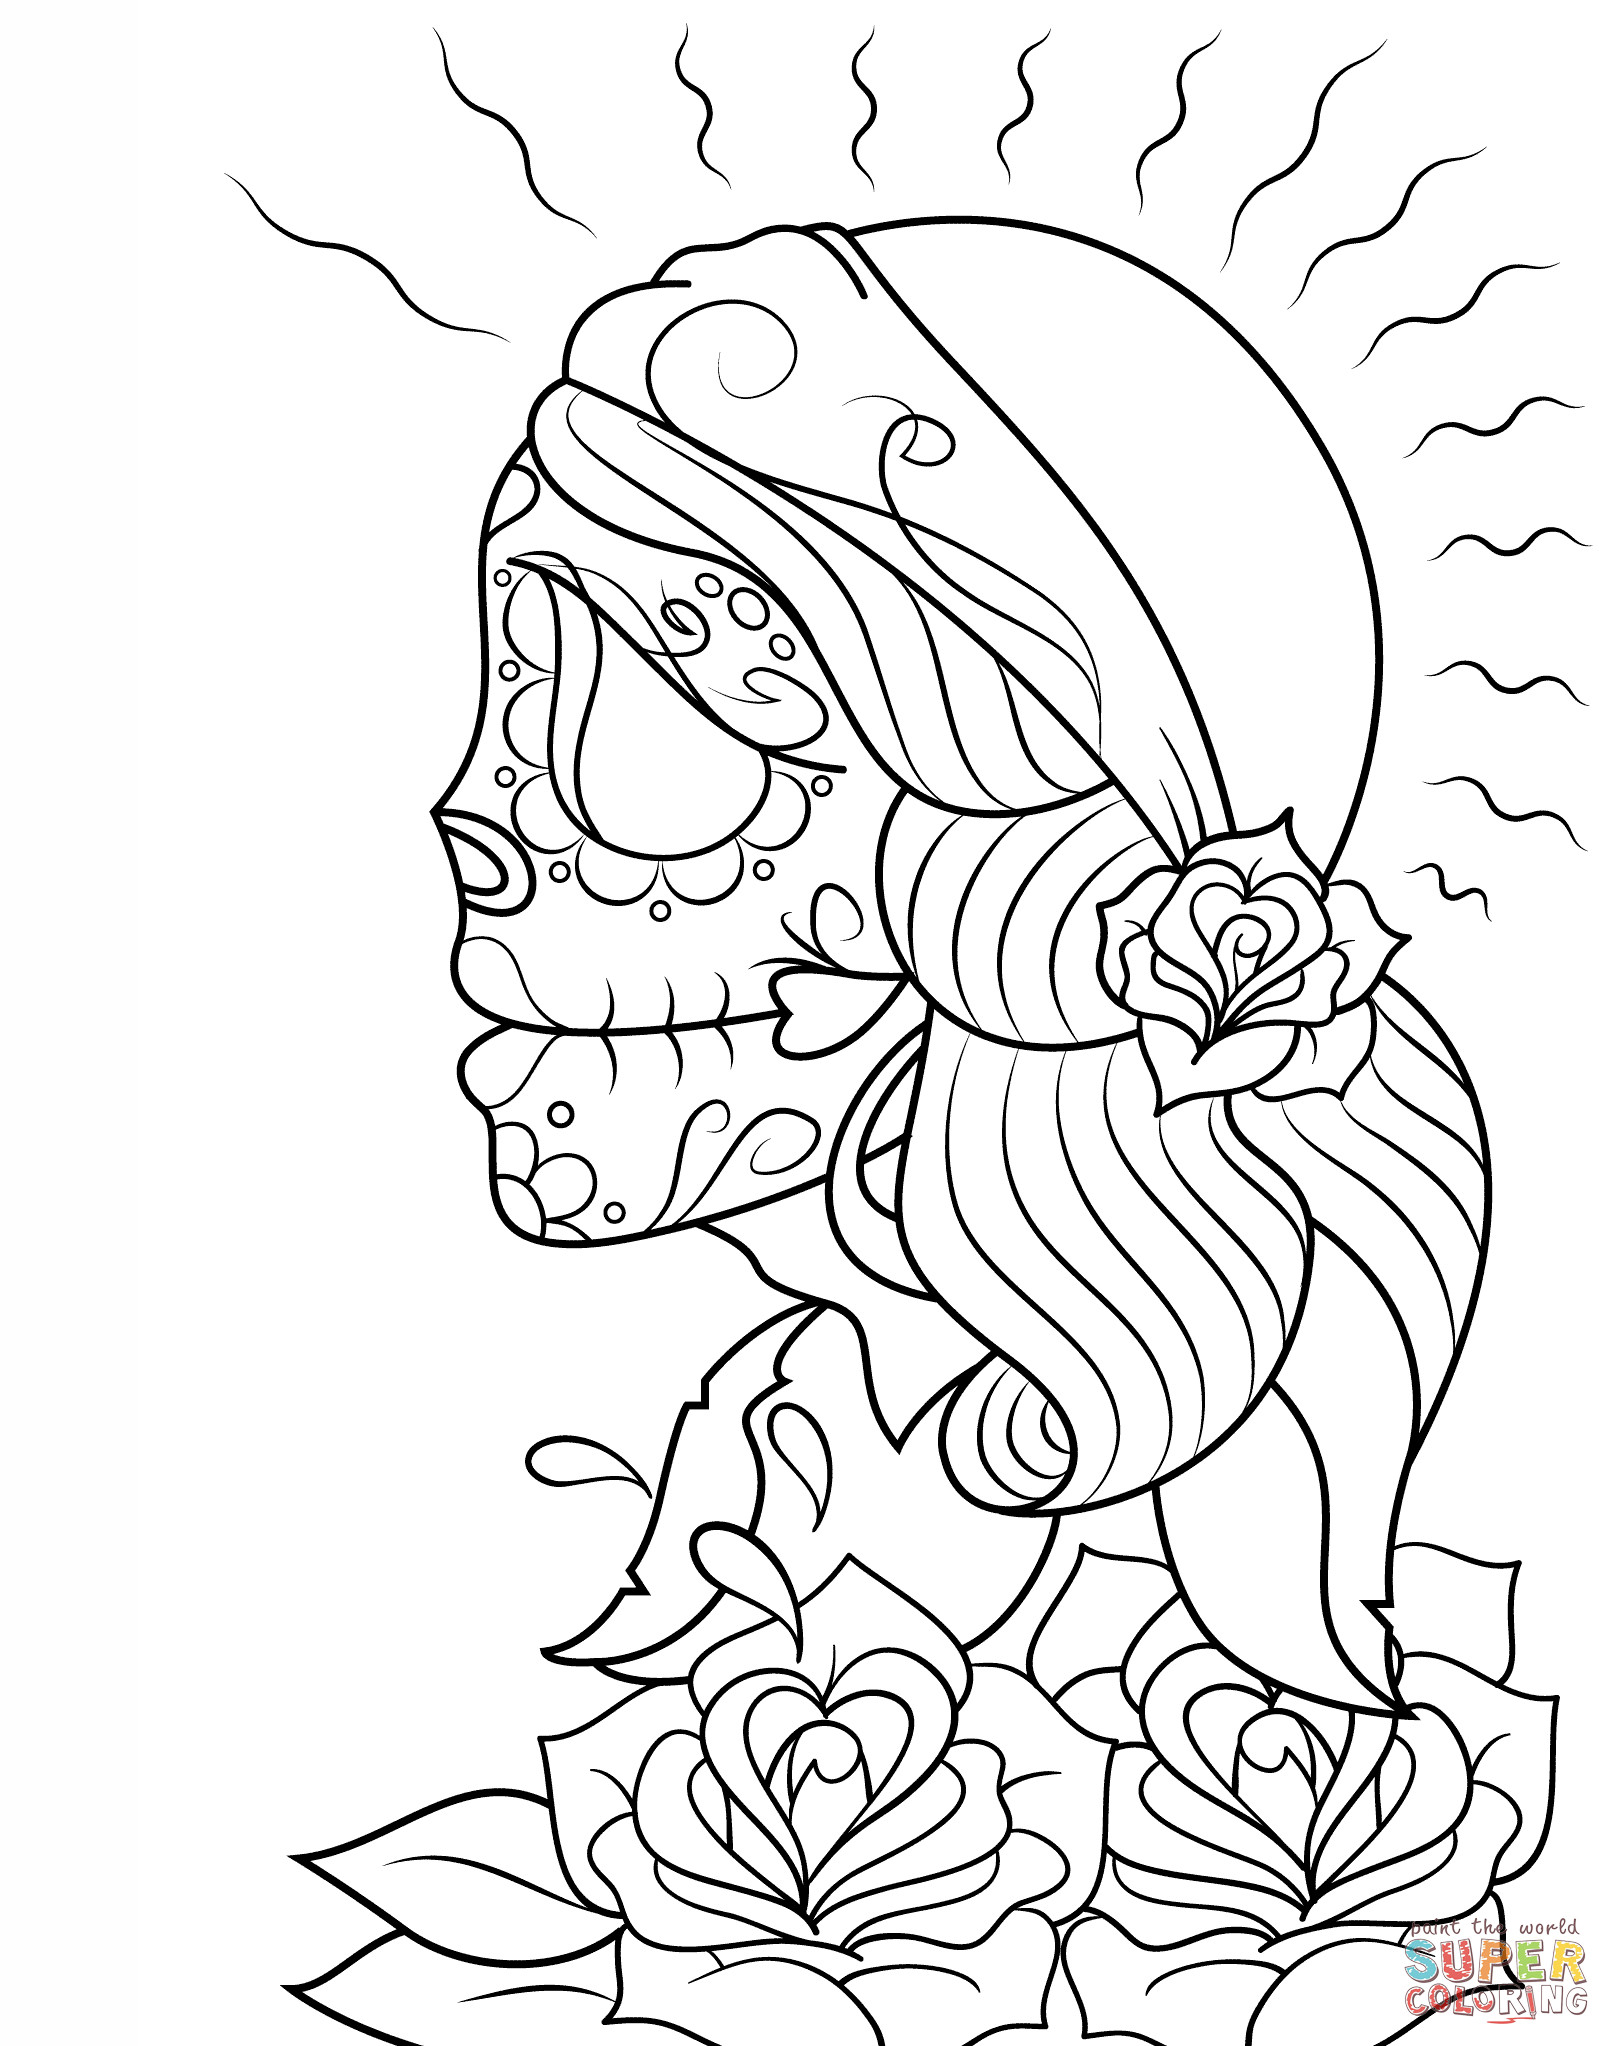 Girl Skull Coloring Pages
 Day of the Dead Girl Skull coloring page